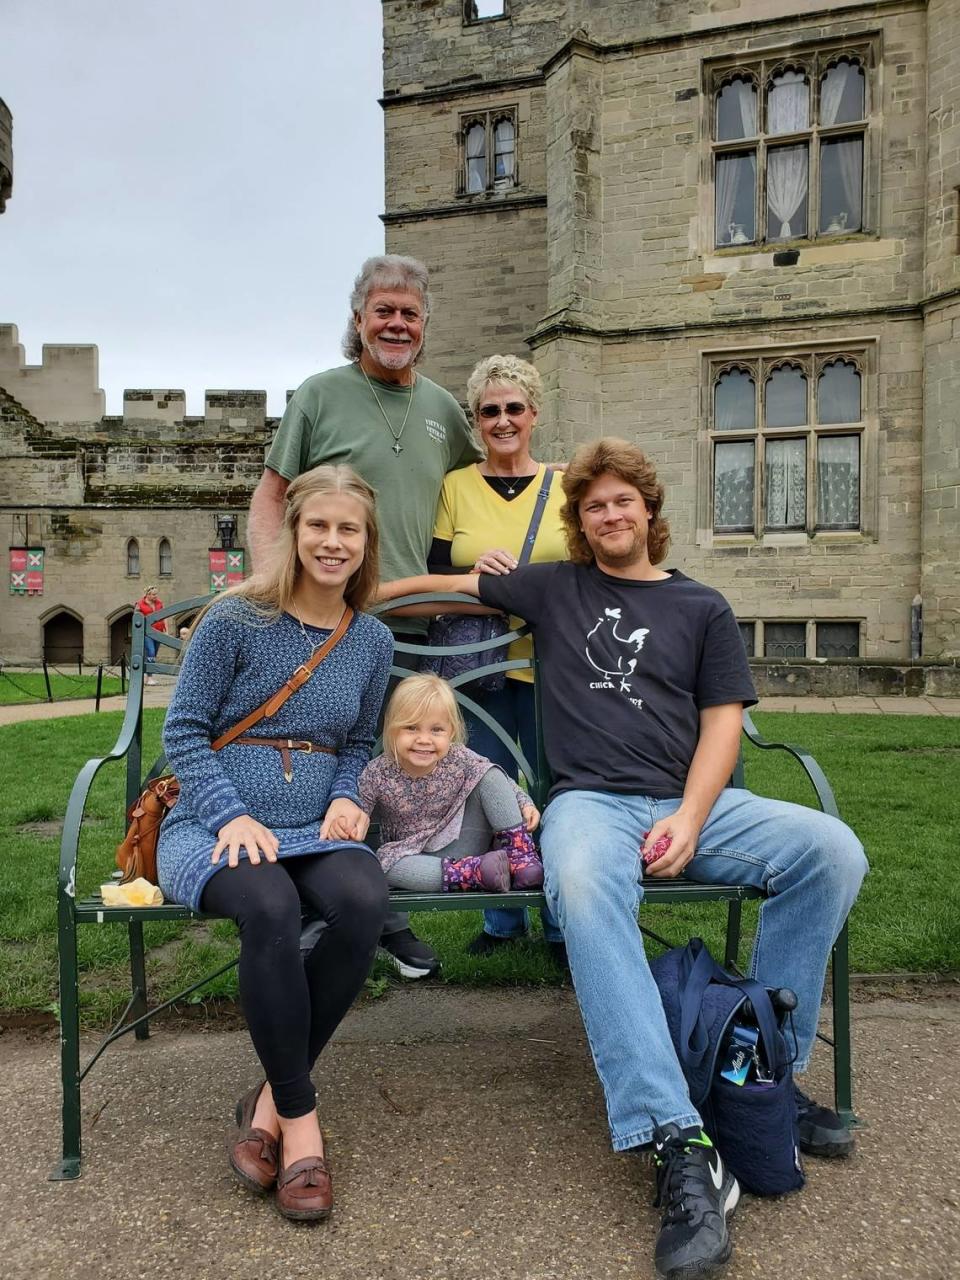 Terry Brain and his family visited Warwick Castle in England before he was hospitalized. Shown are Terry Brain and Ann Brain, back, and his daughter-in-law Laura Kostad, son Trevor Brain and their daughter, front.